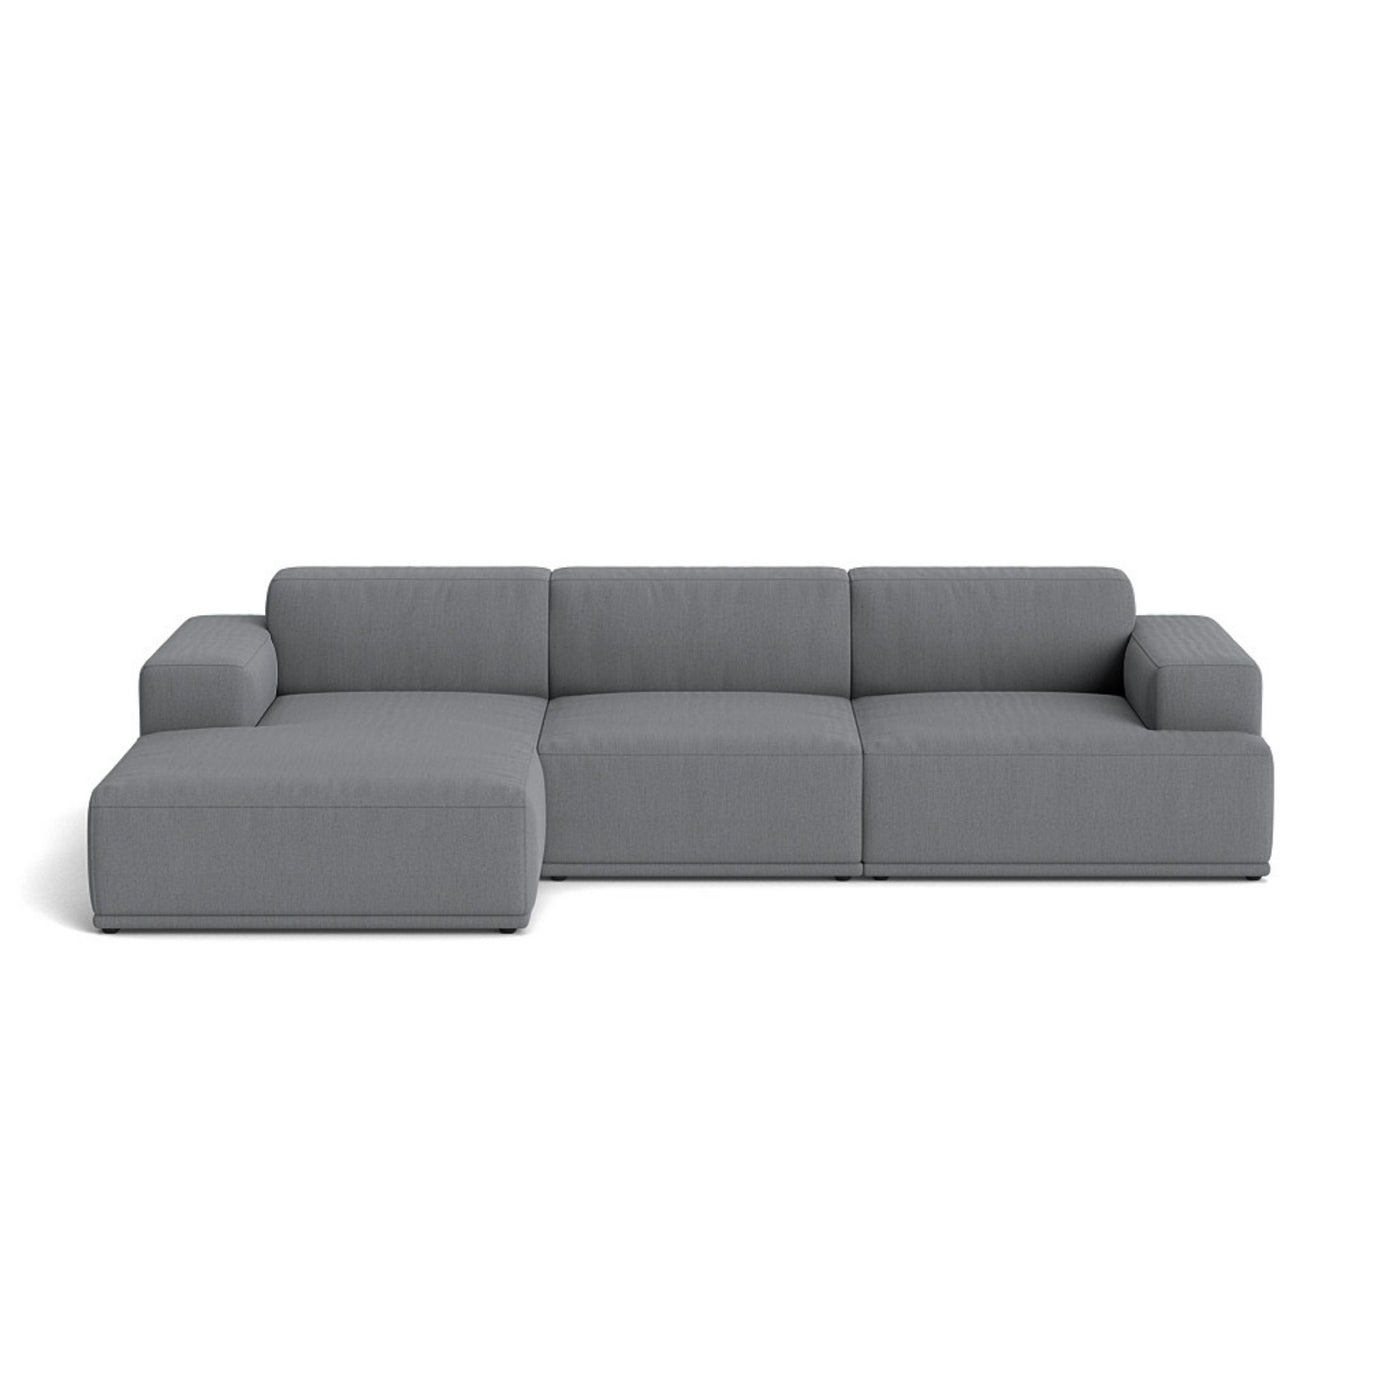 Muuto Connect Soft Modular 3 Seater Sofa, configuration 2. Made-to-order from someday designs. #colour_re-wool-158